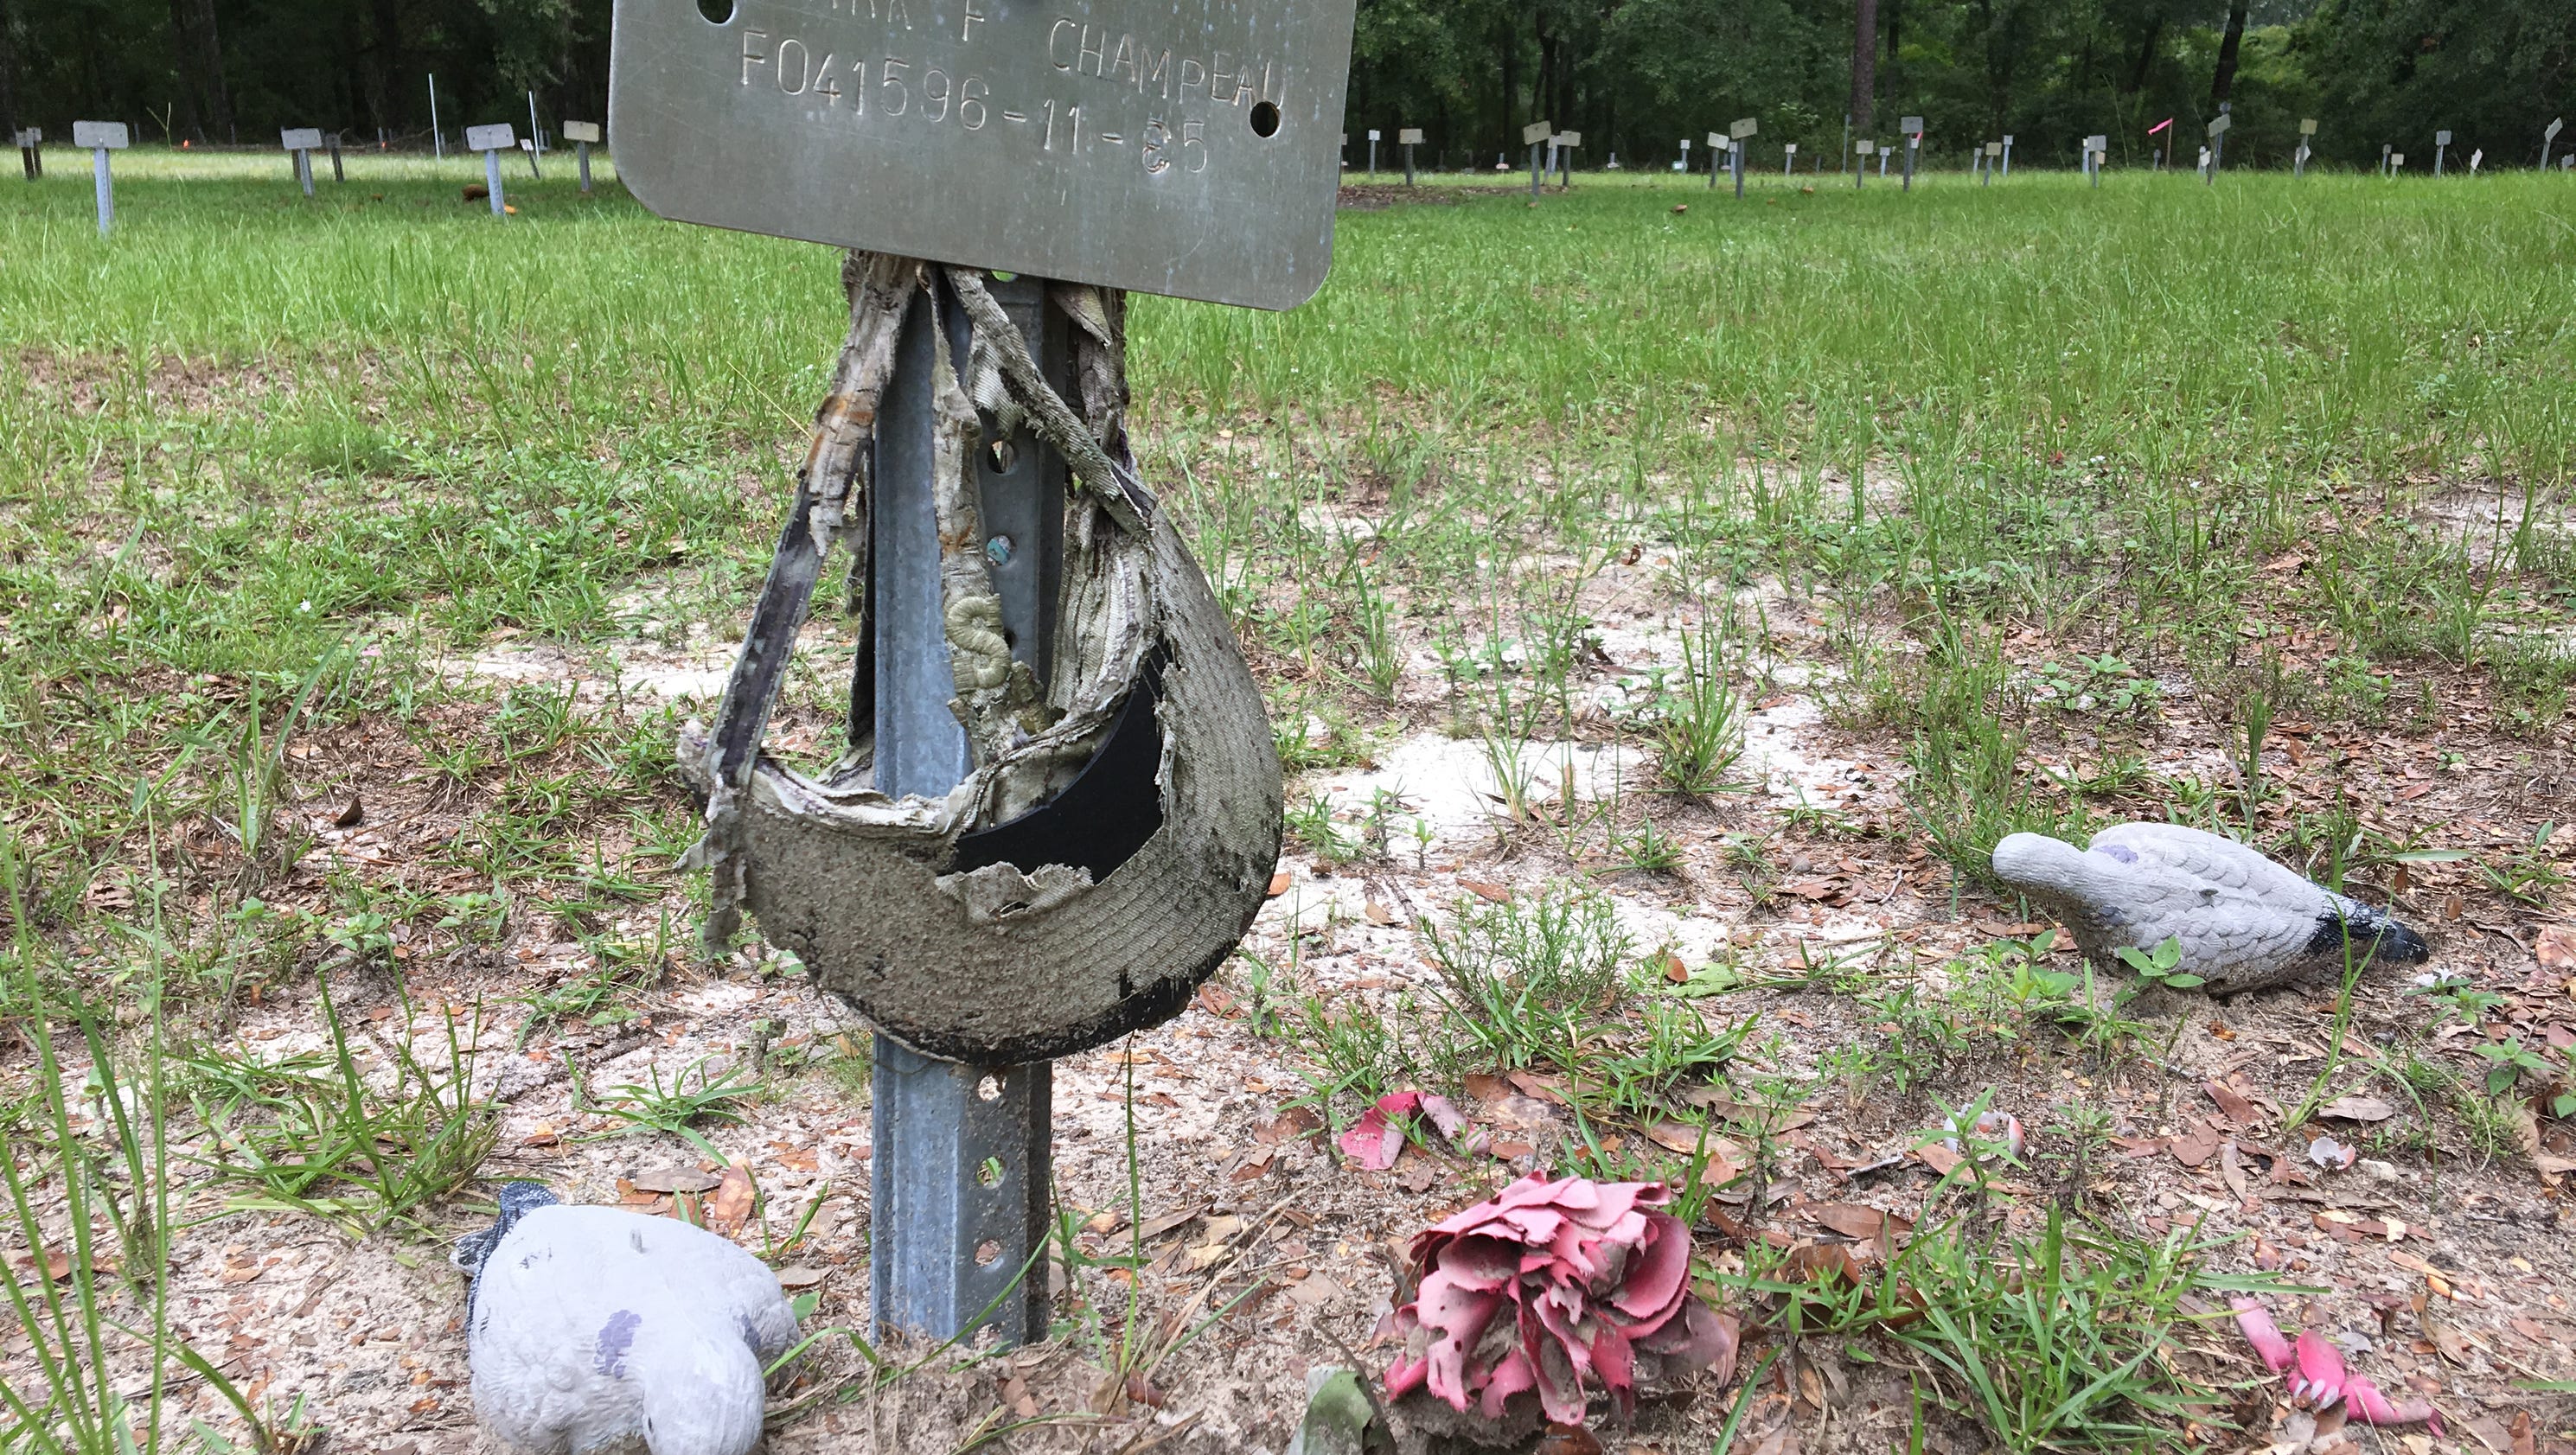 A priceless burden: Indigent burials at Leon County's 'pauper's ... - Tallahassee.com